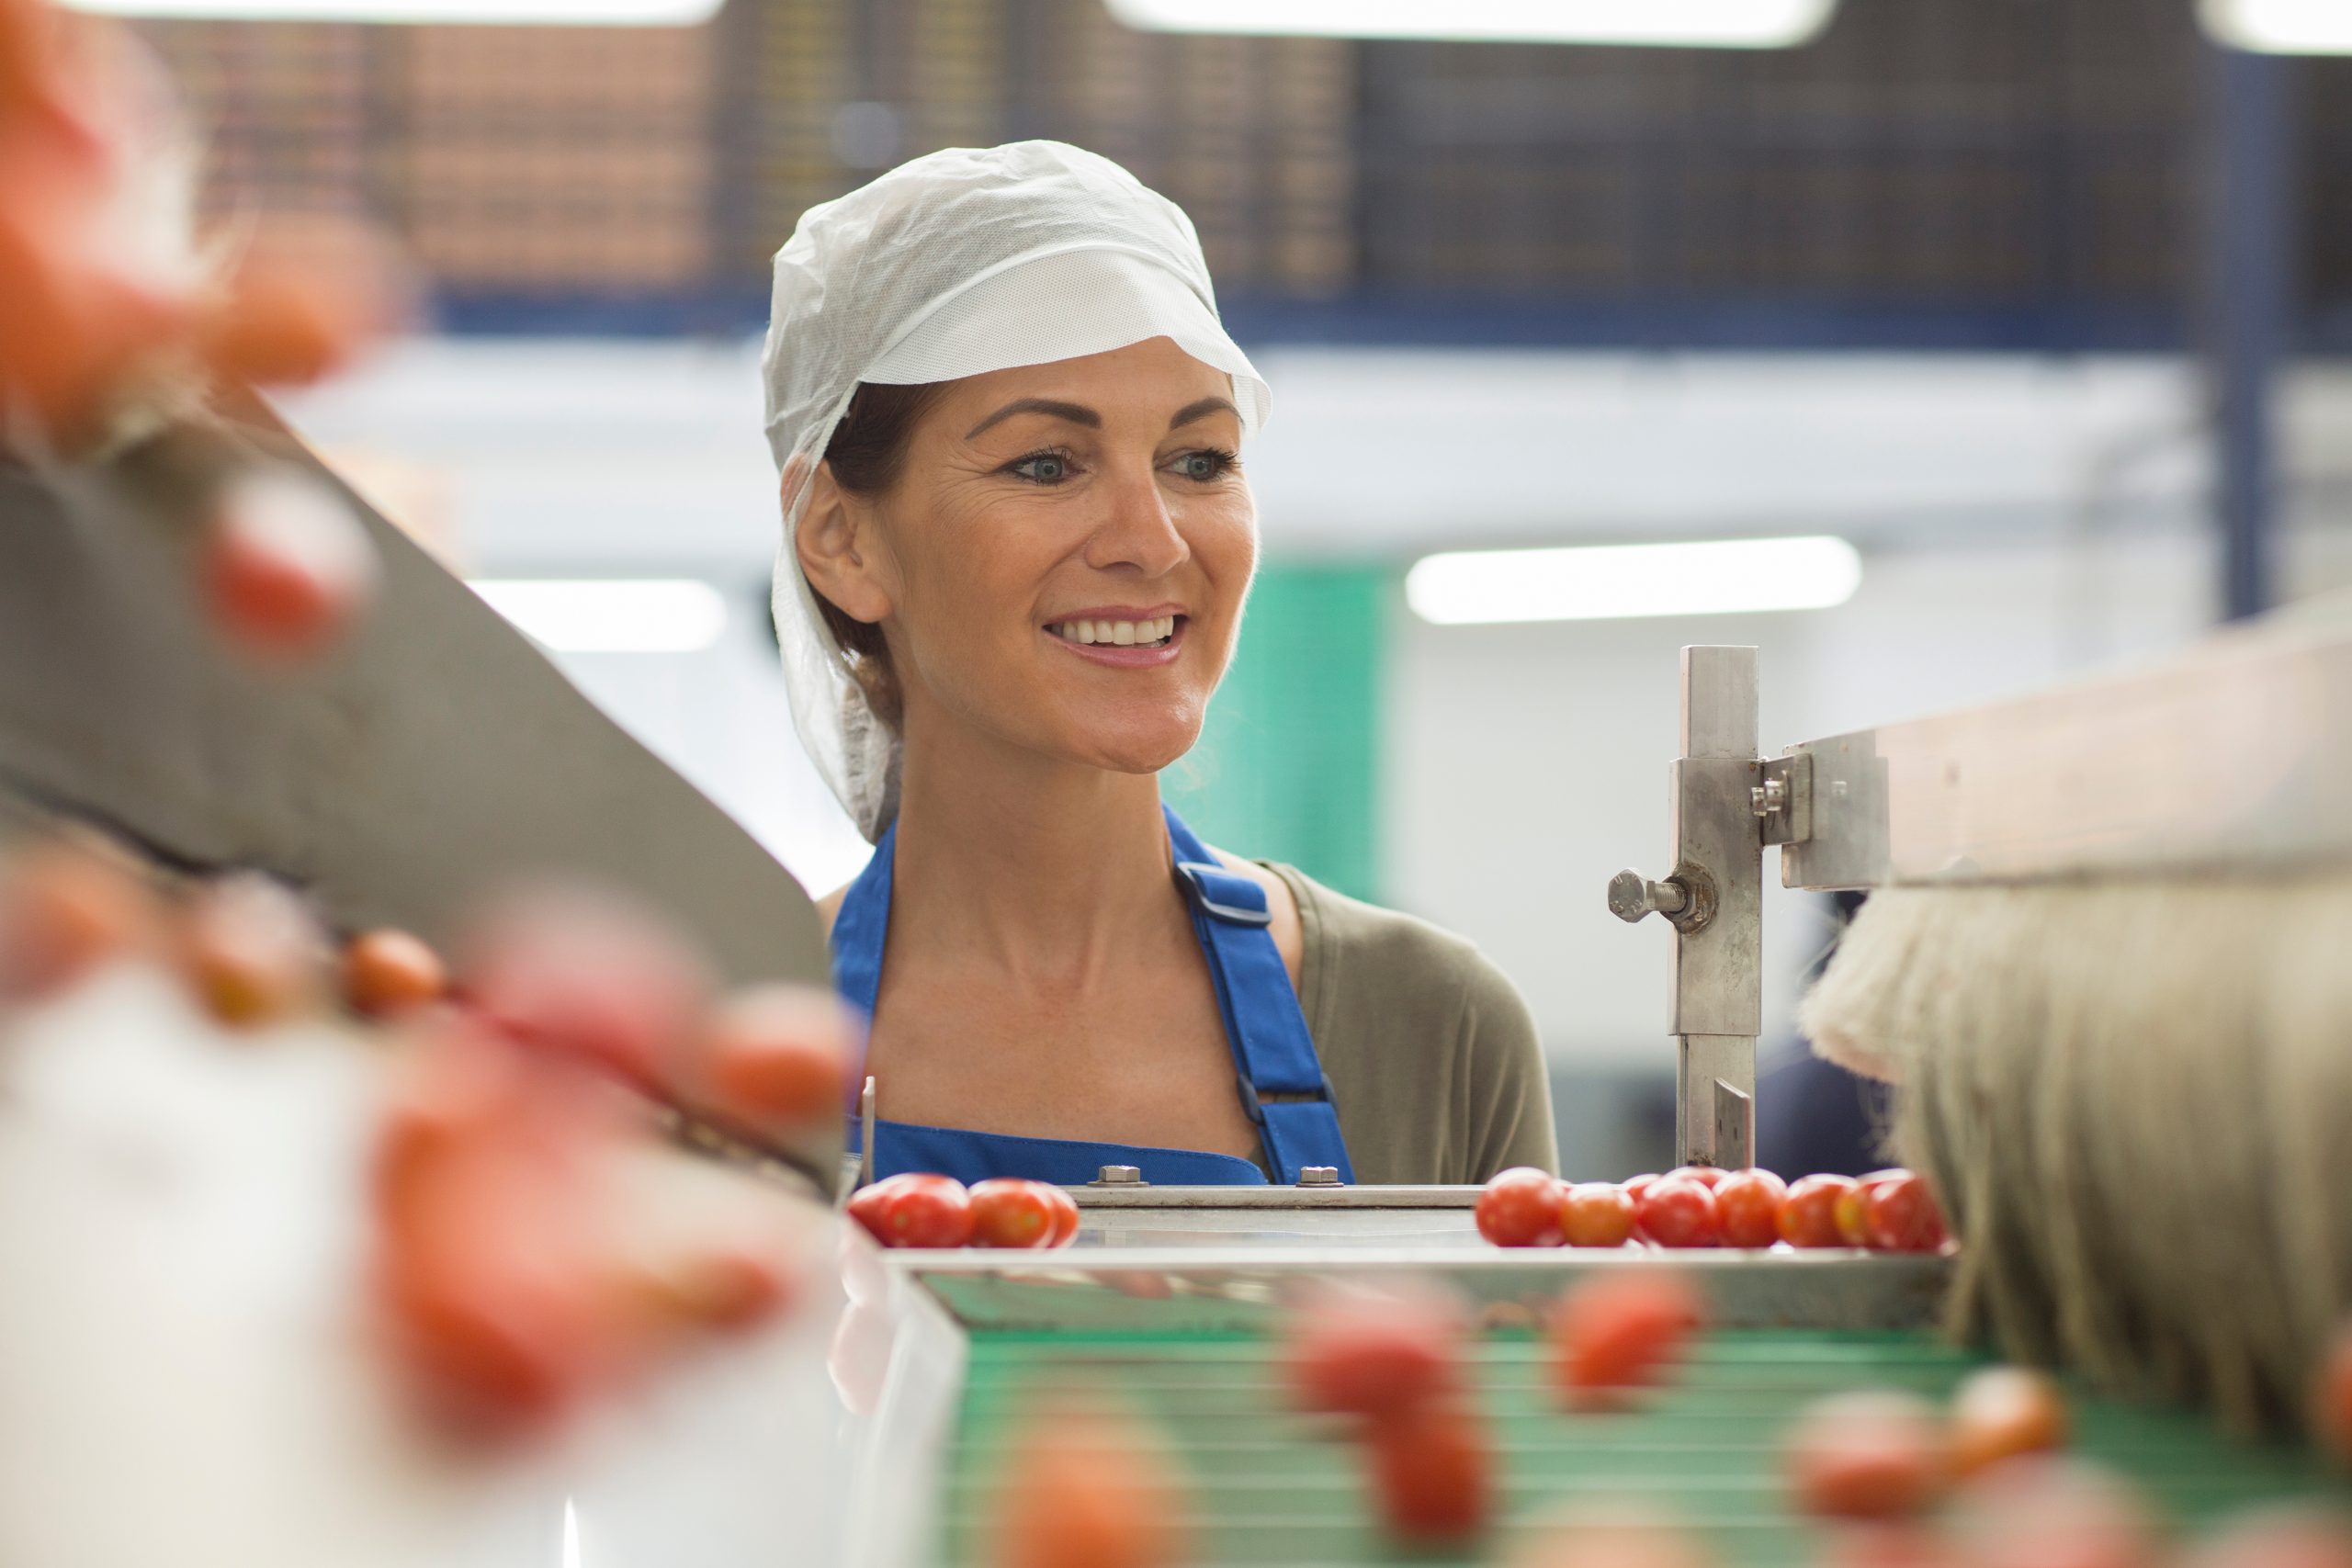 Smiling female worker watching tomatoes in food processing plant